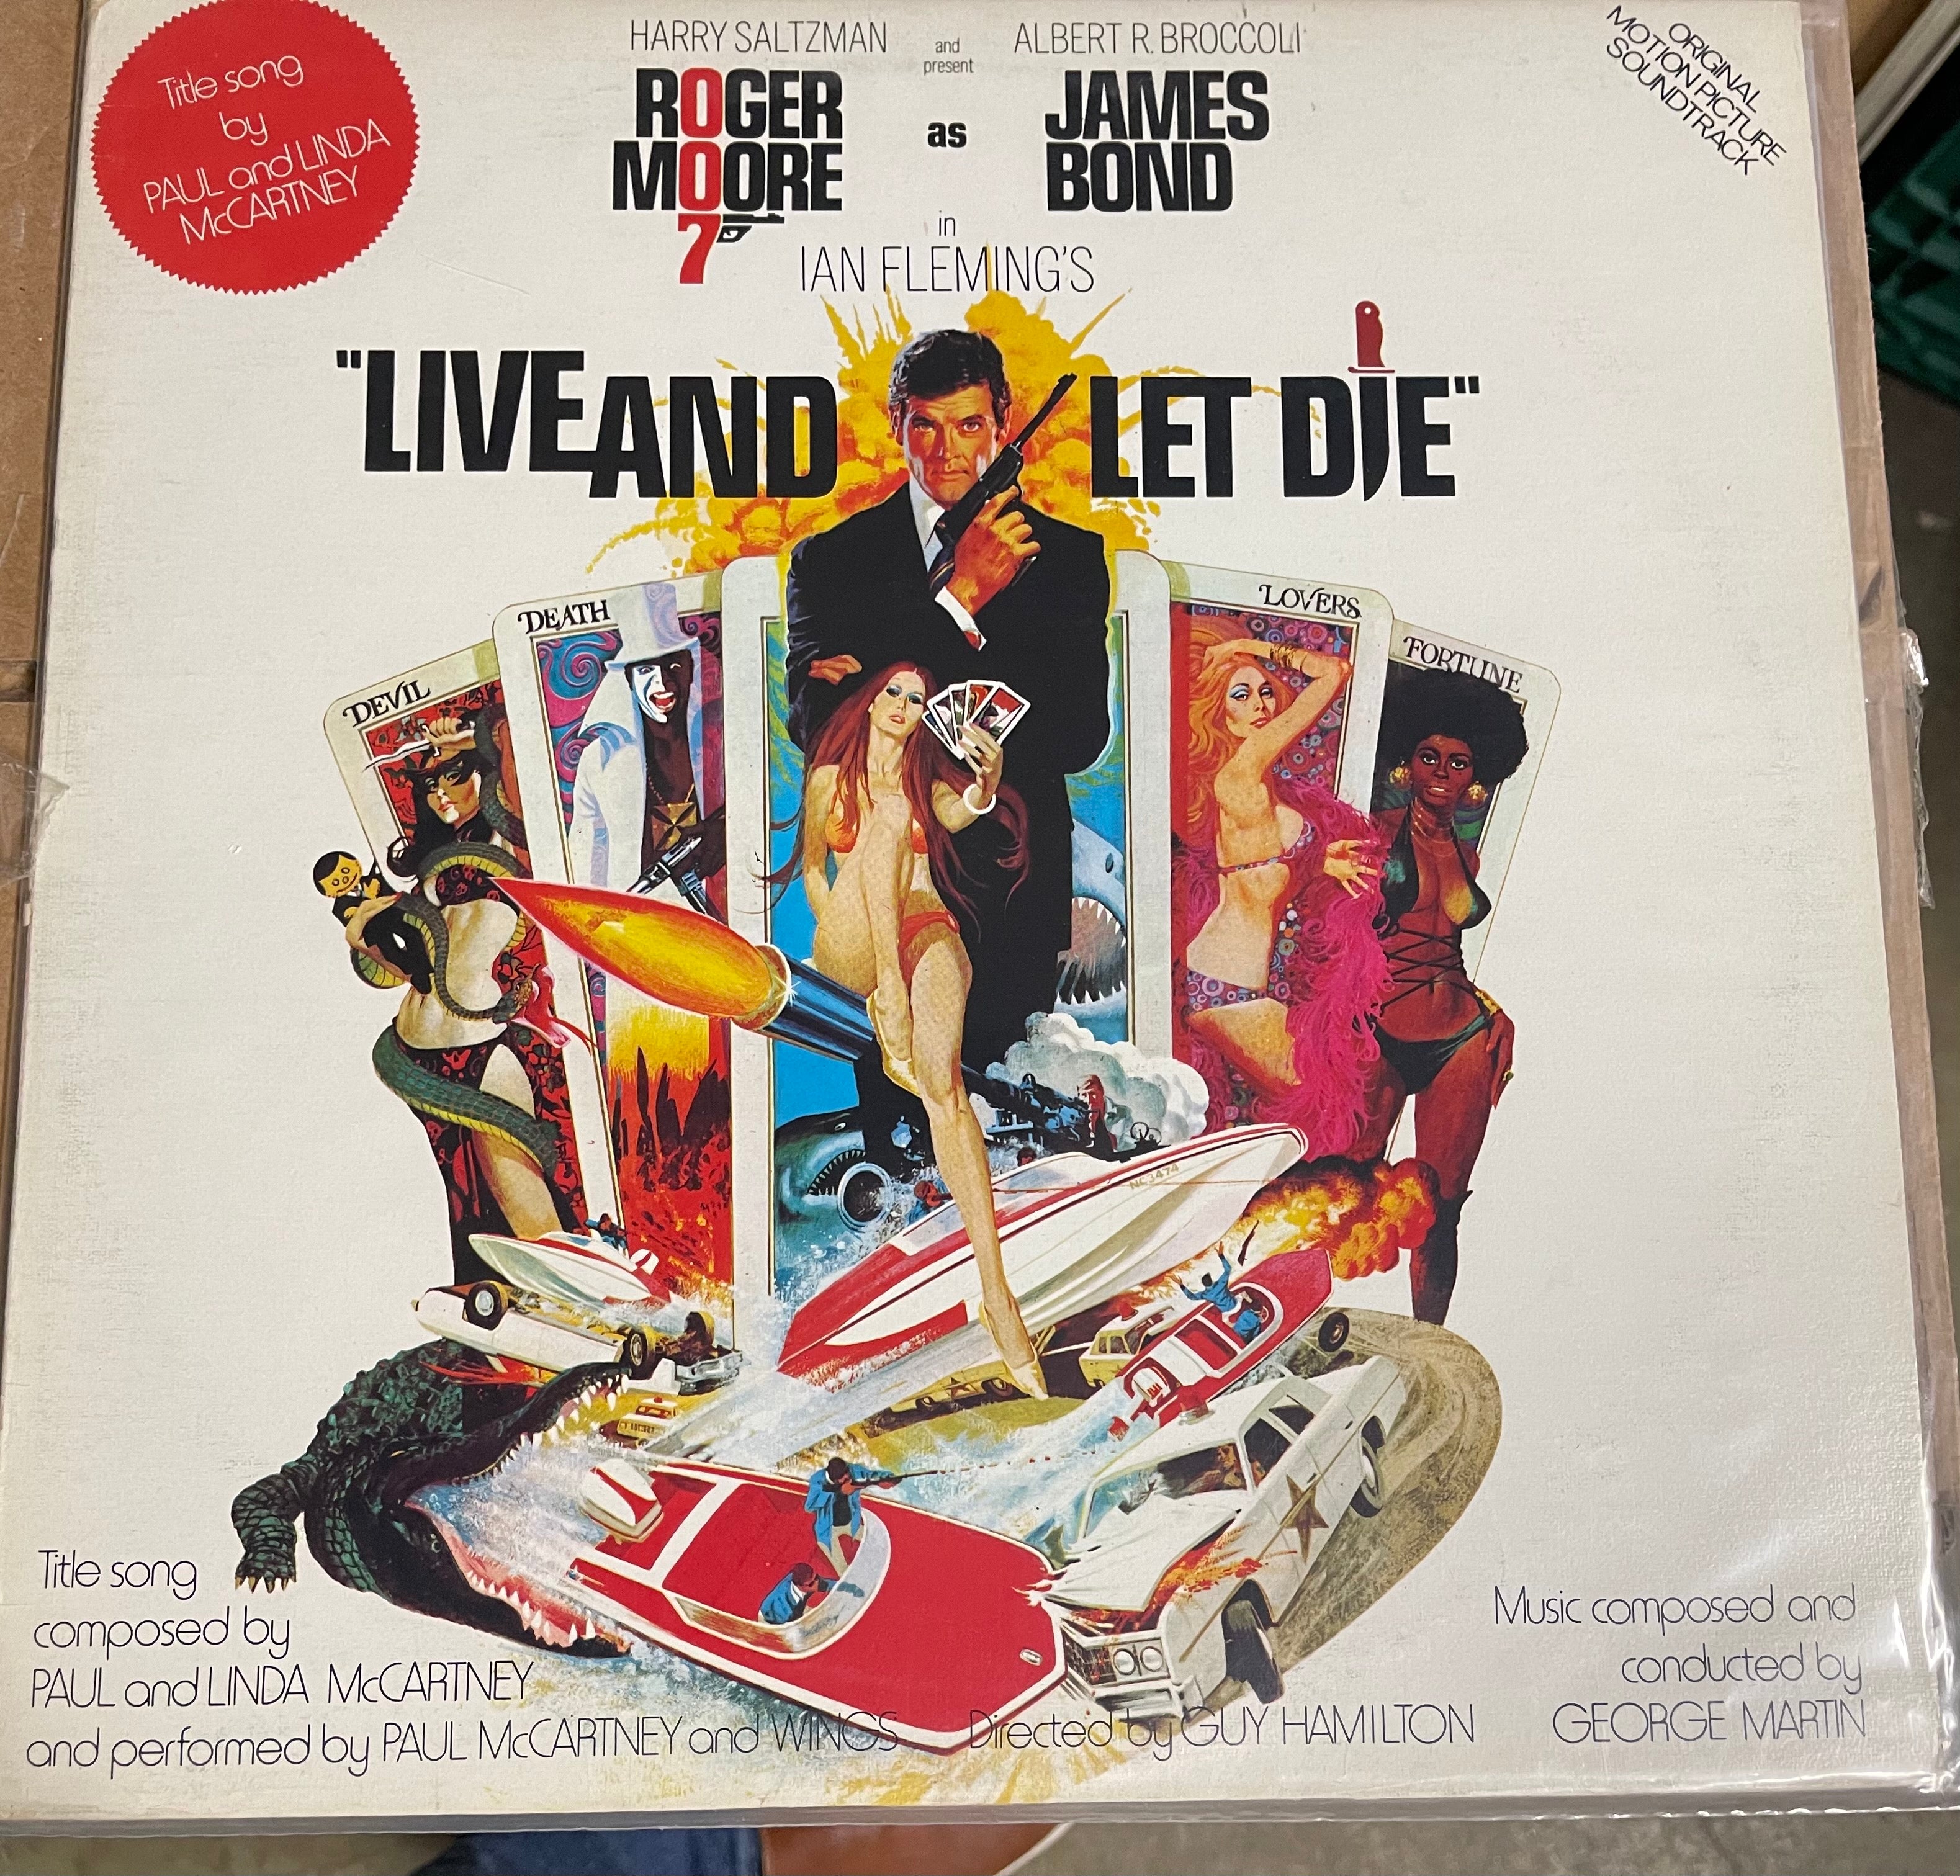 Great vintage record album from this famous James Bond movie 1973